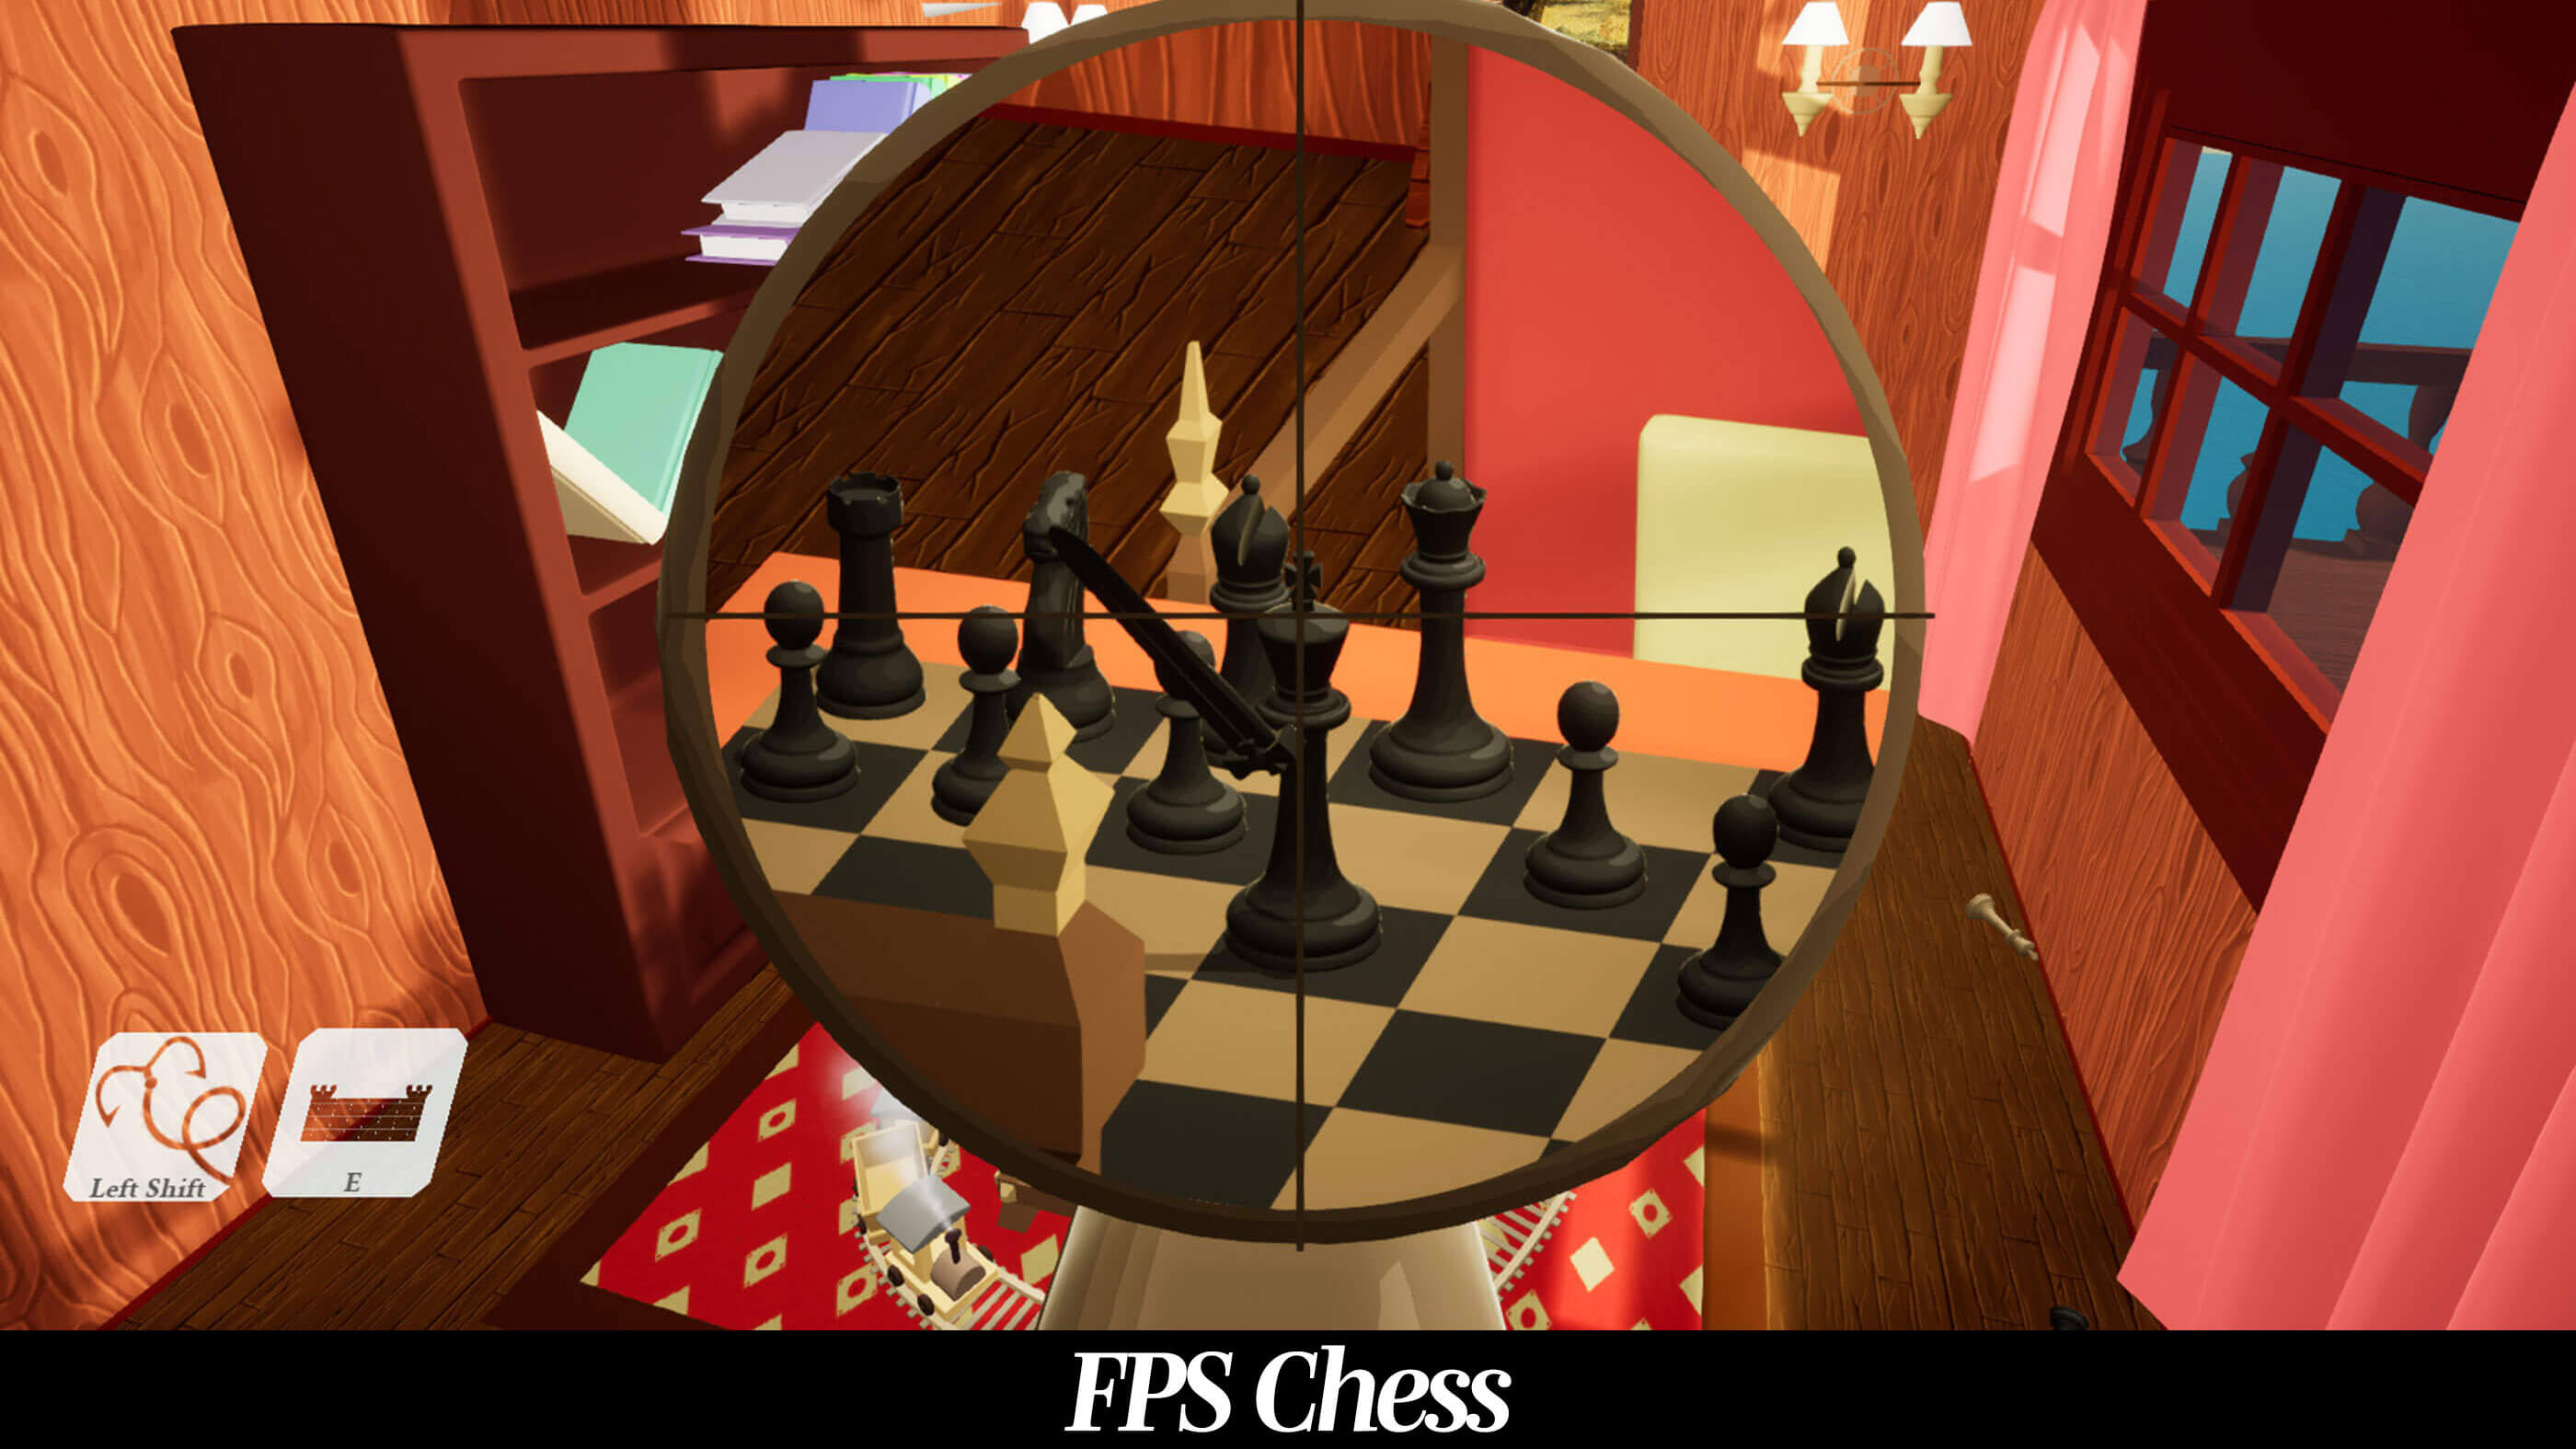 Chess Games Online - Play Now for Free